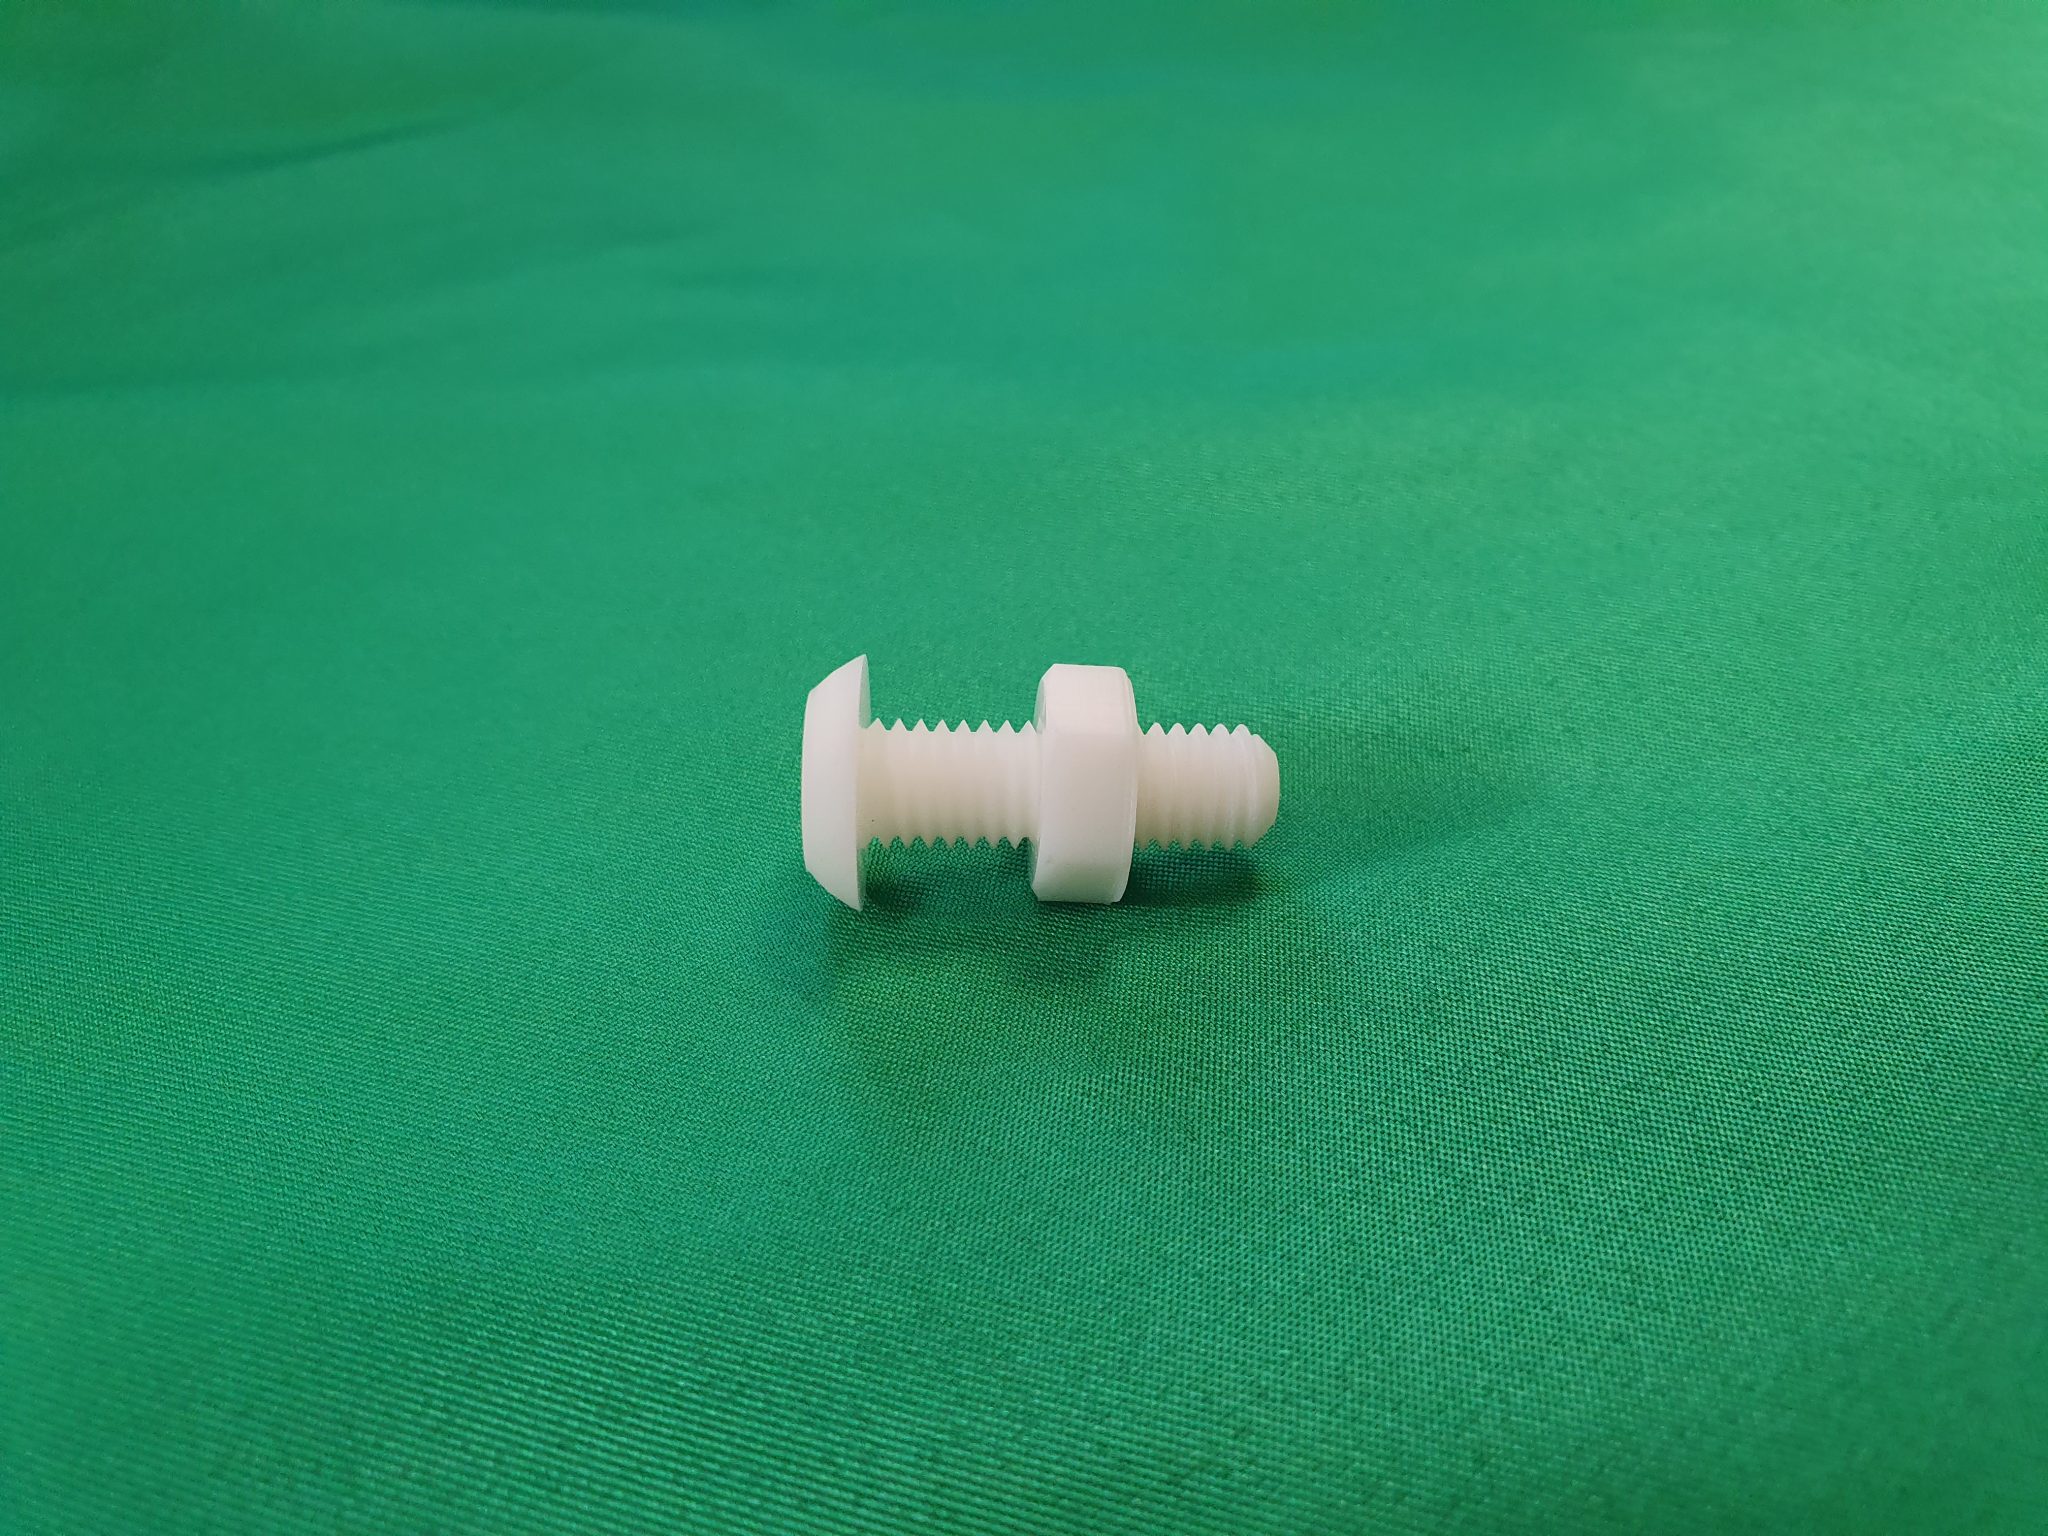 Nut and bolt assembly.